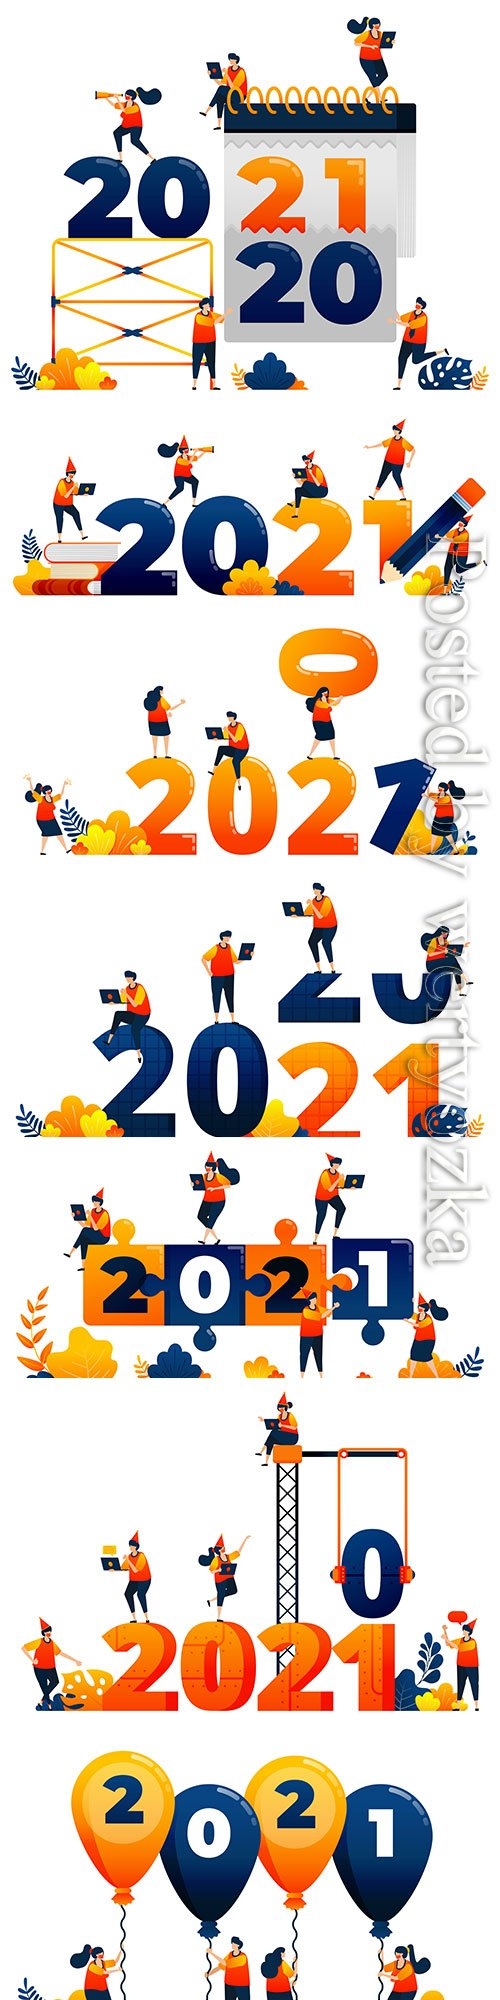 Countdown theme of teamwork in the following year concept vector